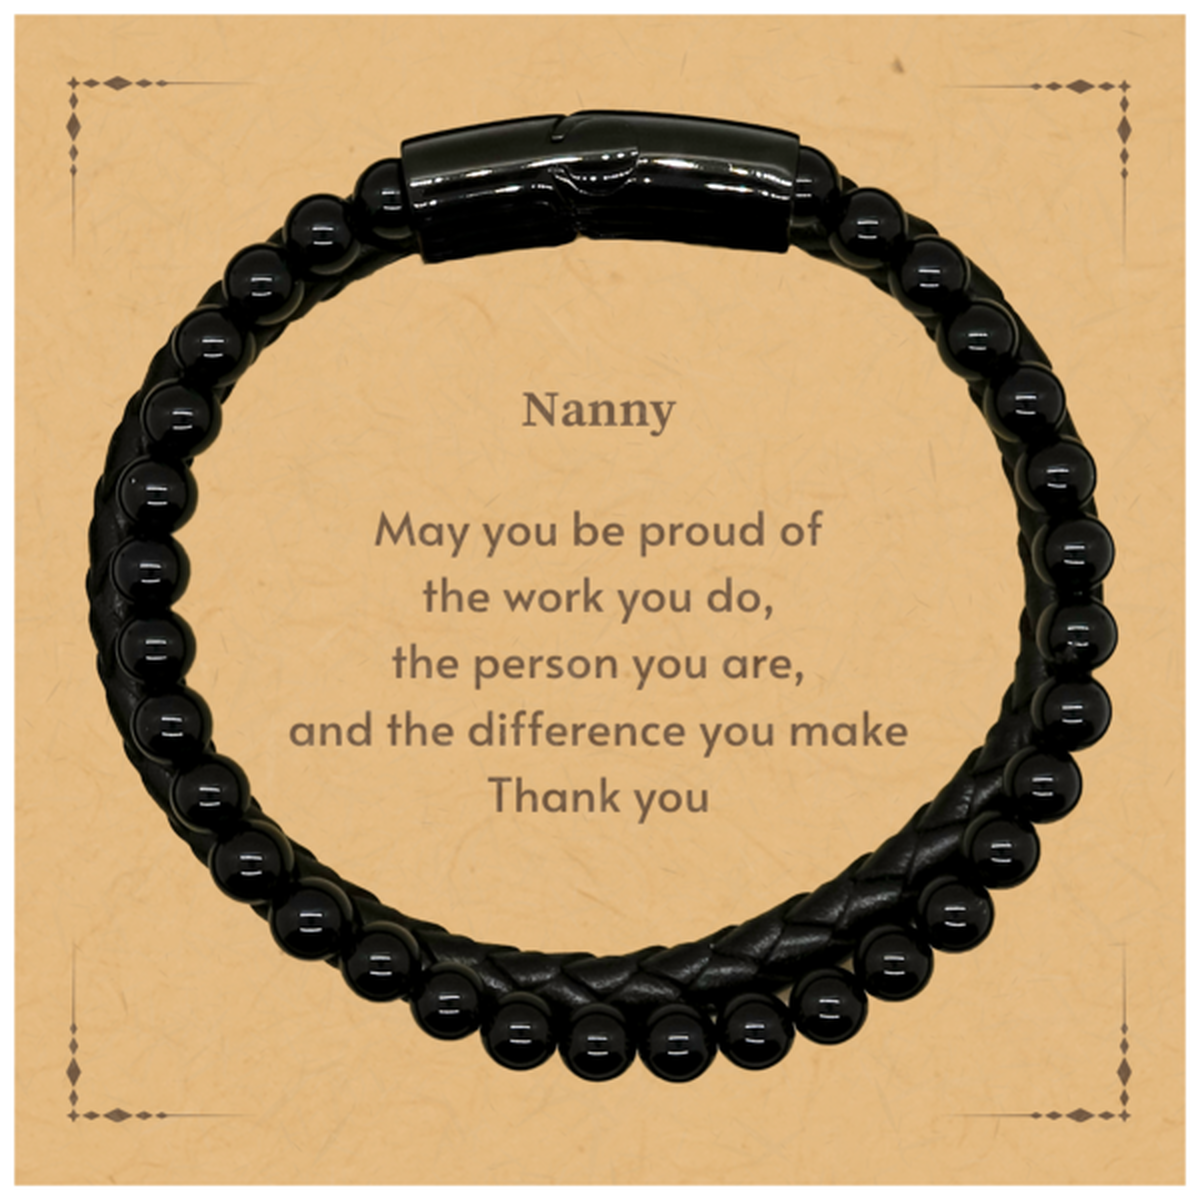 Heartwarming Stone Leather Bracelets Retirement Coworkers Gifts for Nanny, Nanny May You be proud of the work you do, the person you are Gifts for Boss Men Women Friends